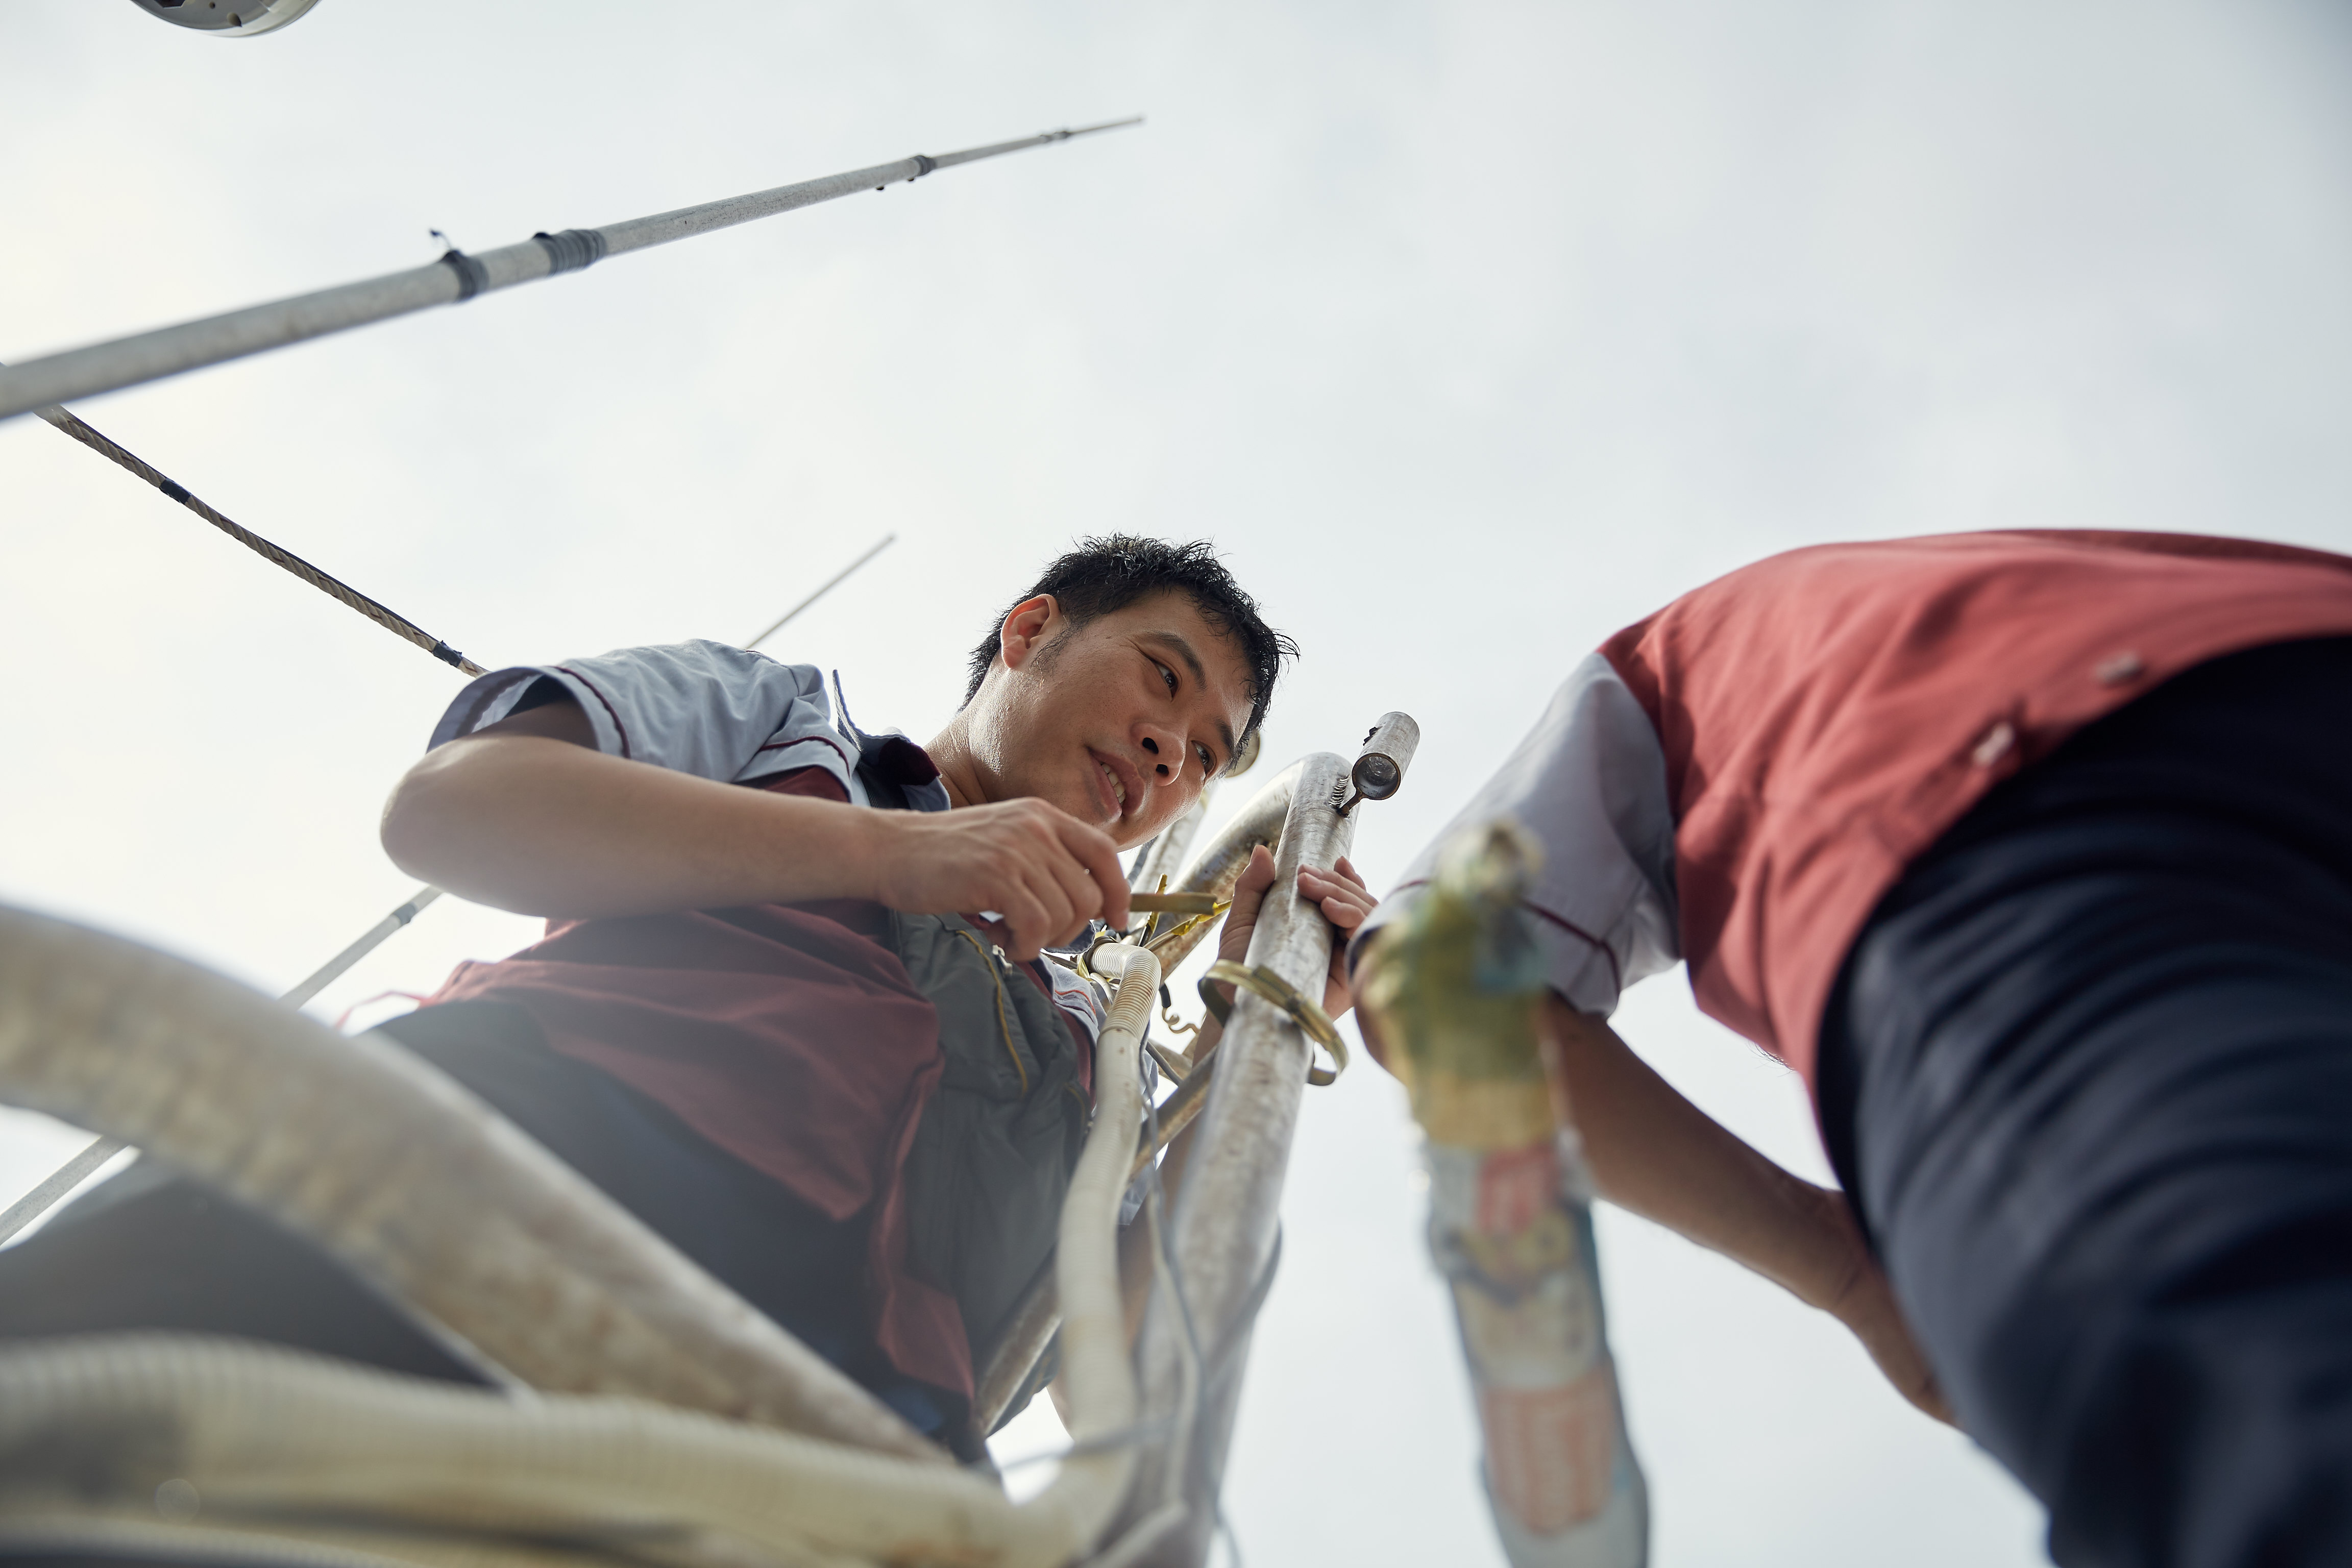 Teams work to install technology on a Thai fishing vessel to bring digital traceability to Thailand’s fishing industry. Photo credit: Thai Union